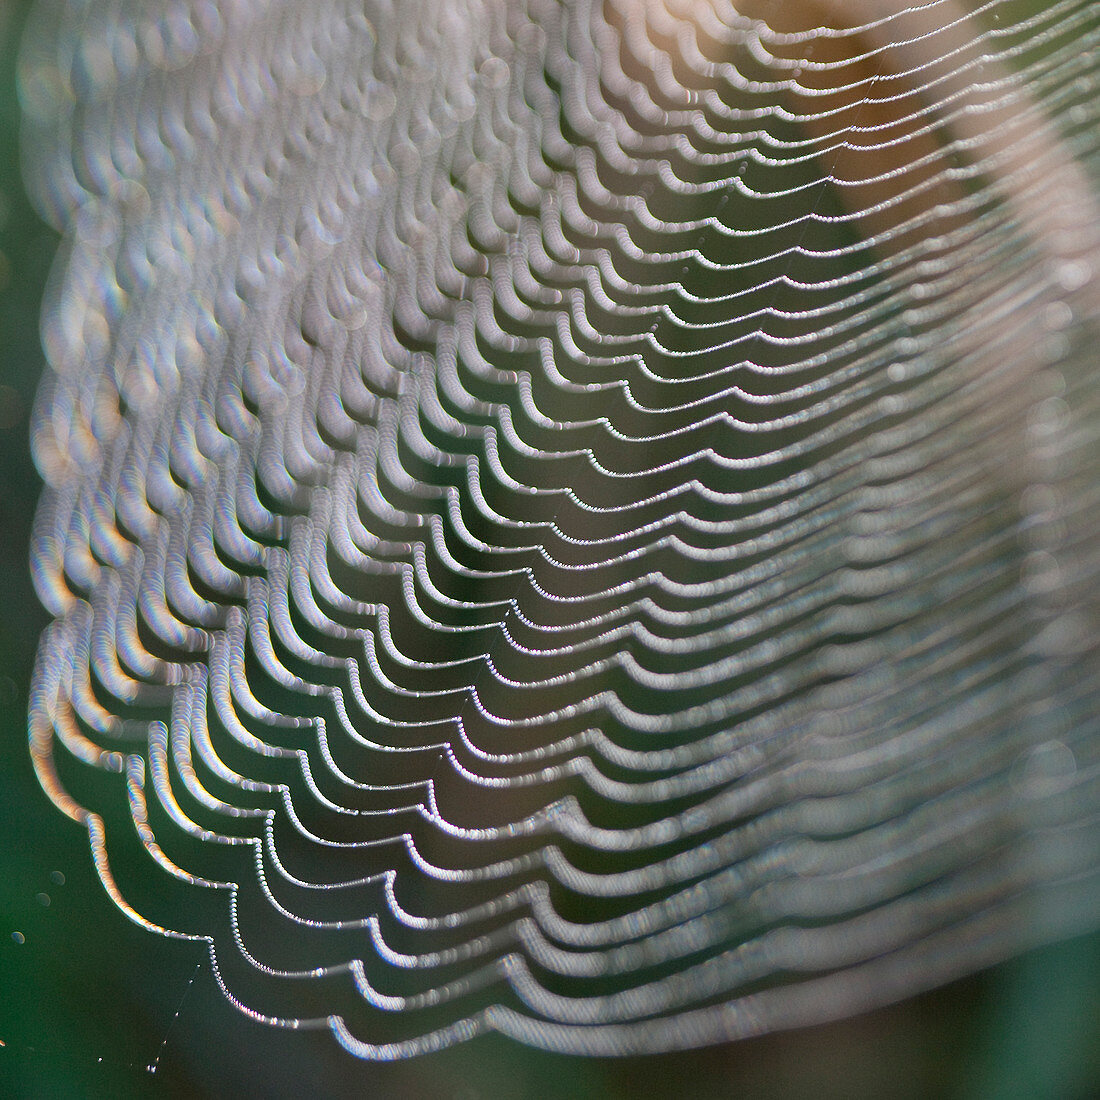 Close up of strands of spider web